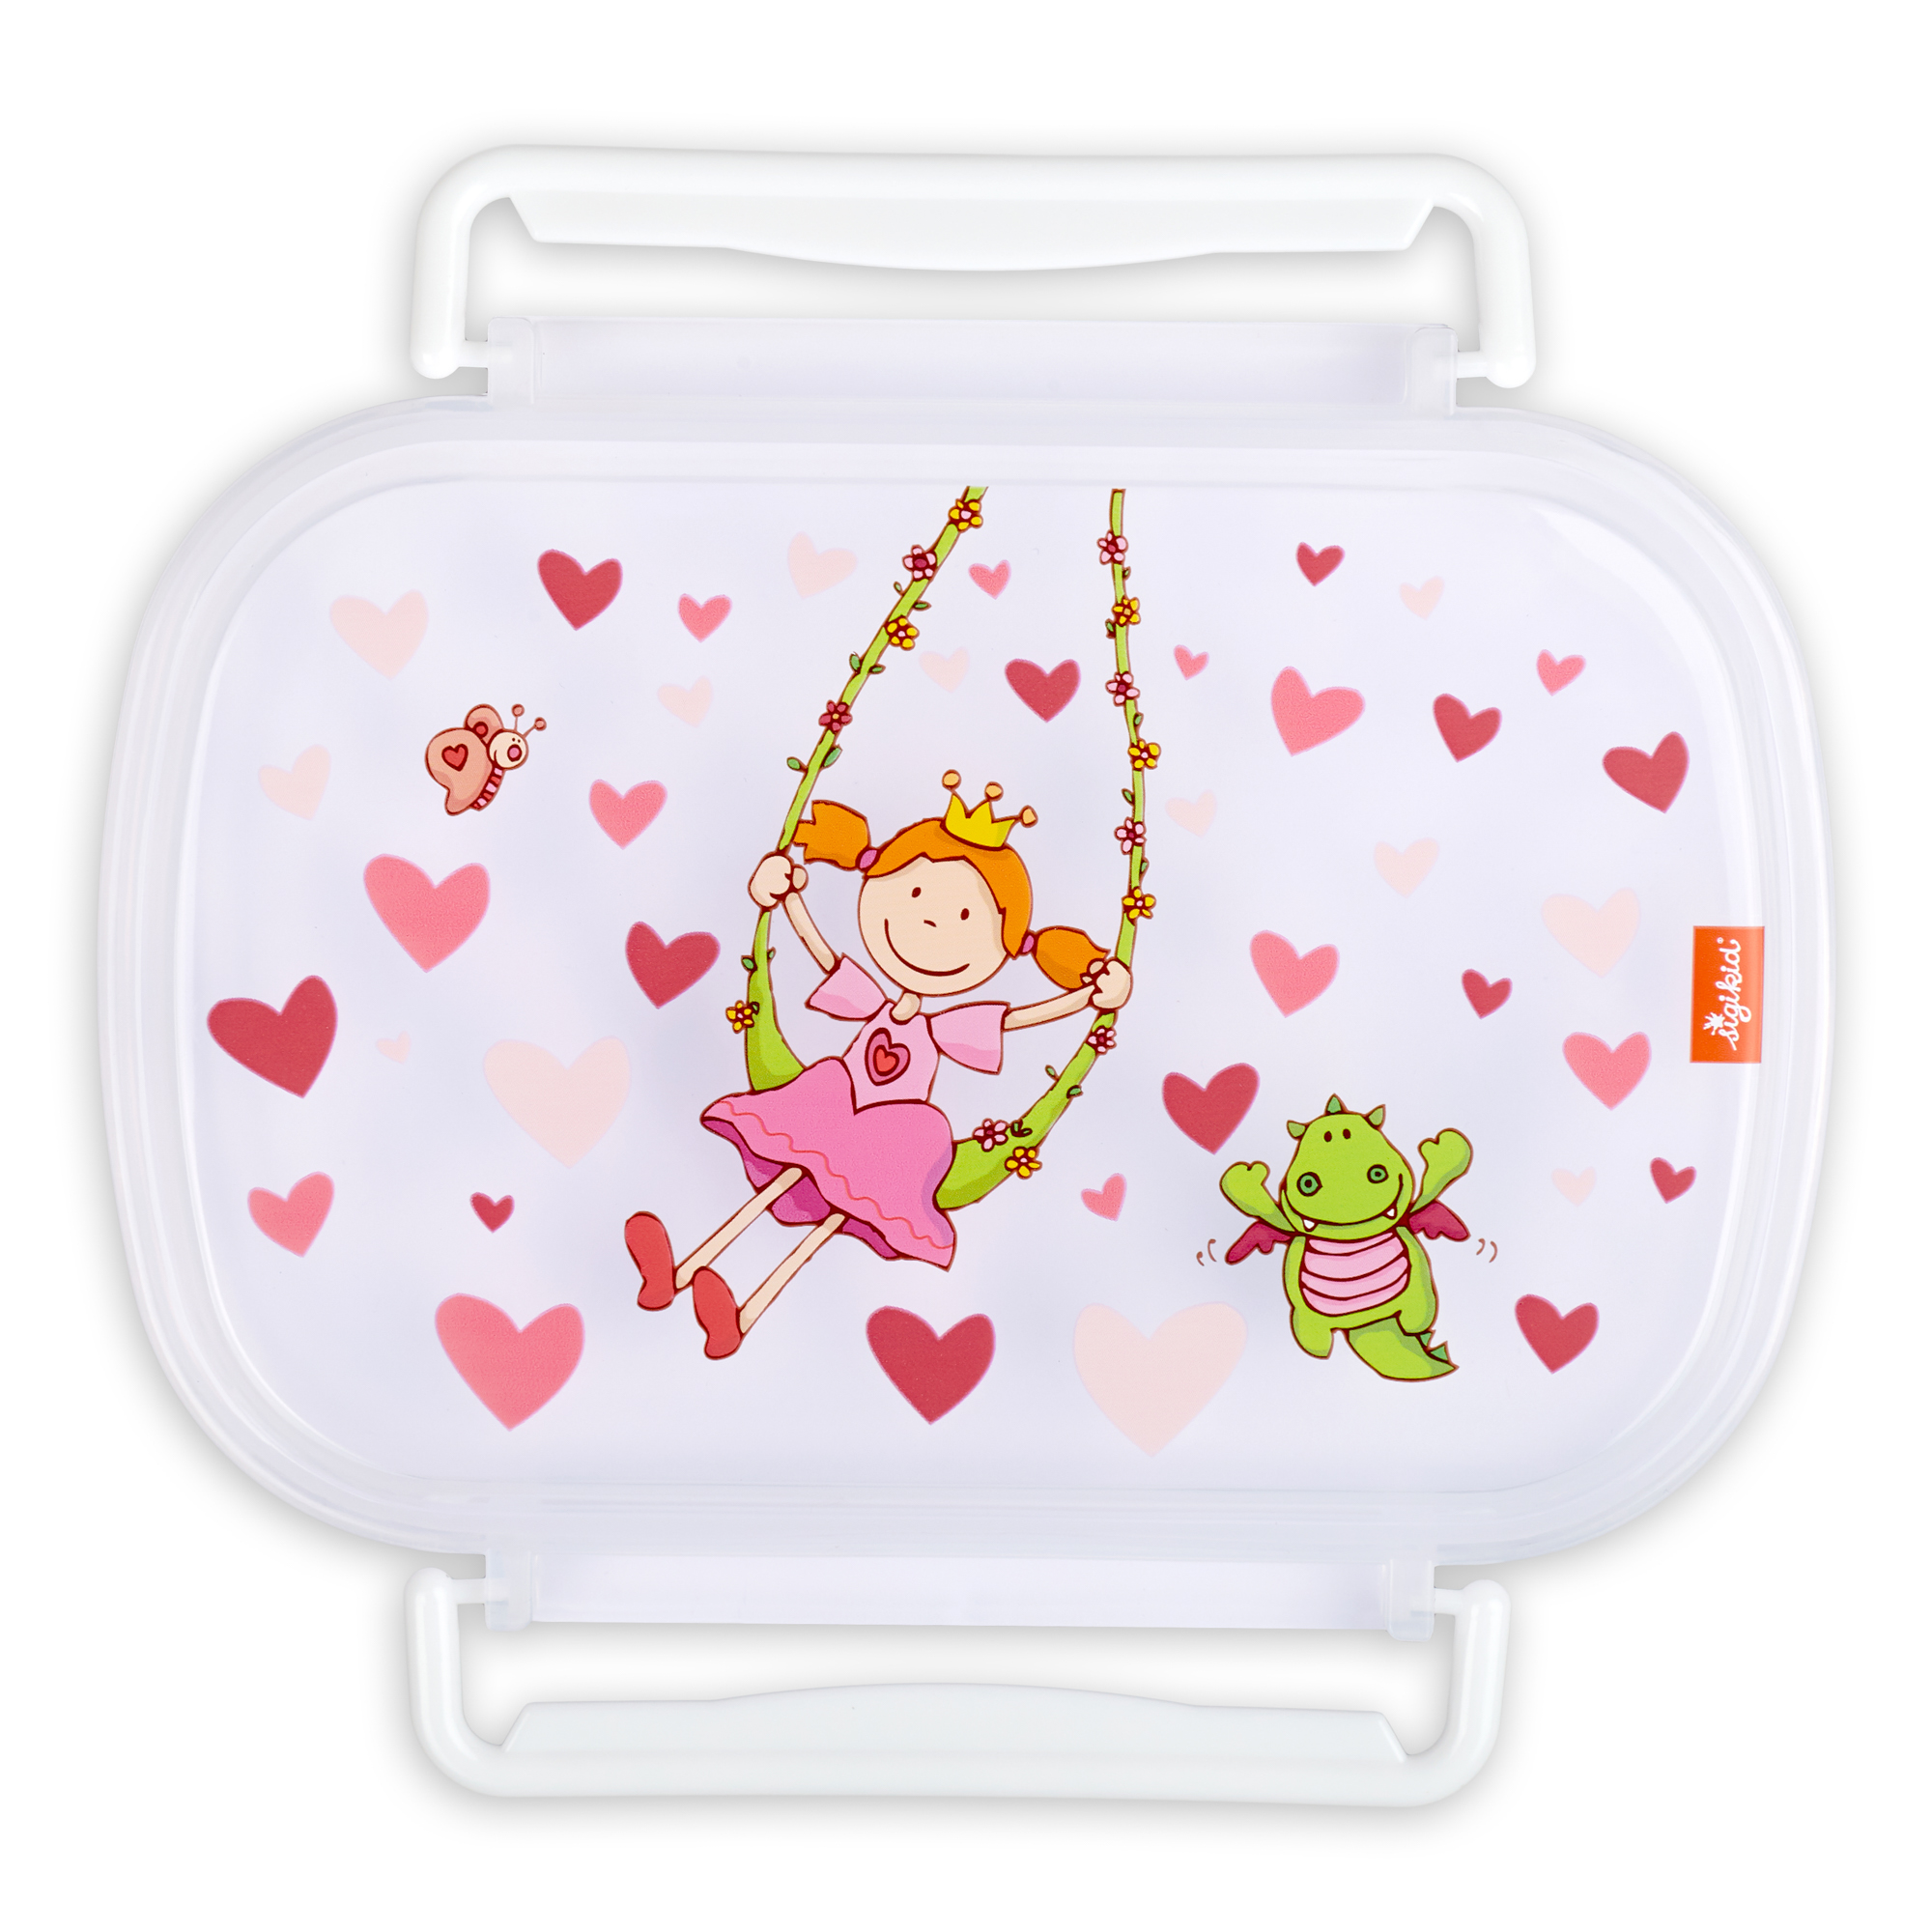 Lunch box lid replacement, princess Pinky Queeny